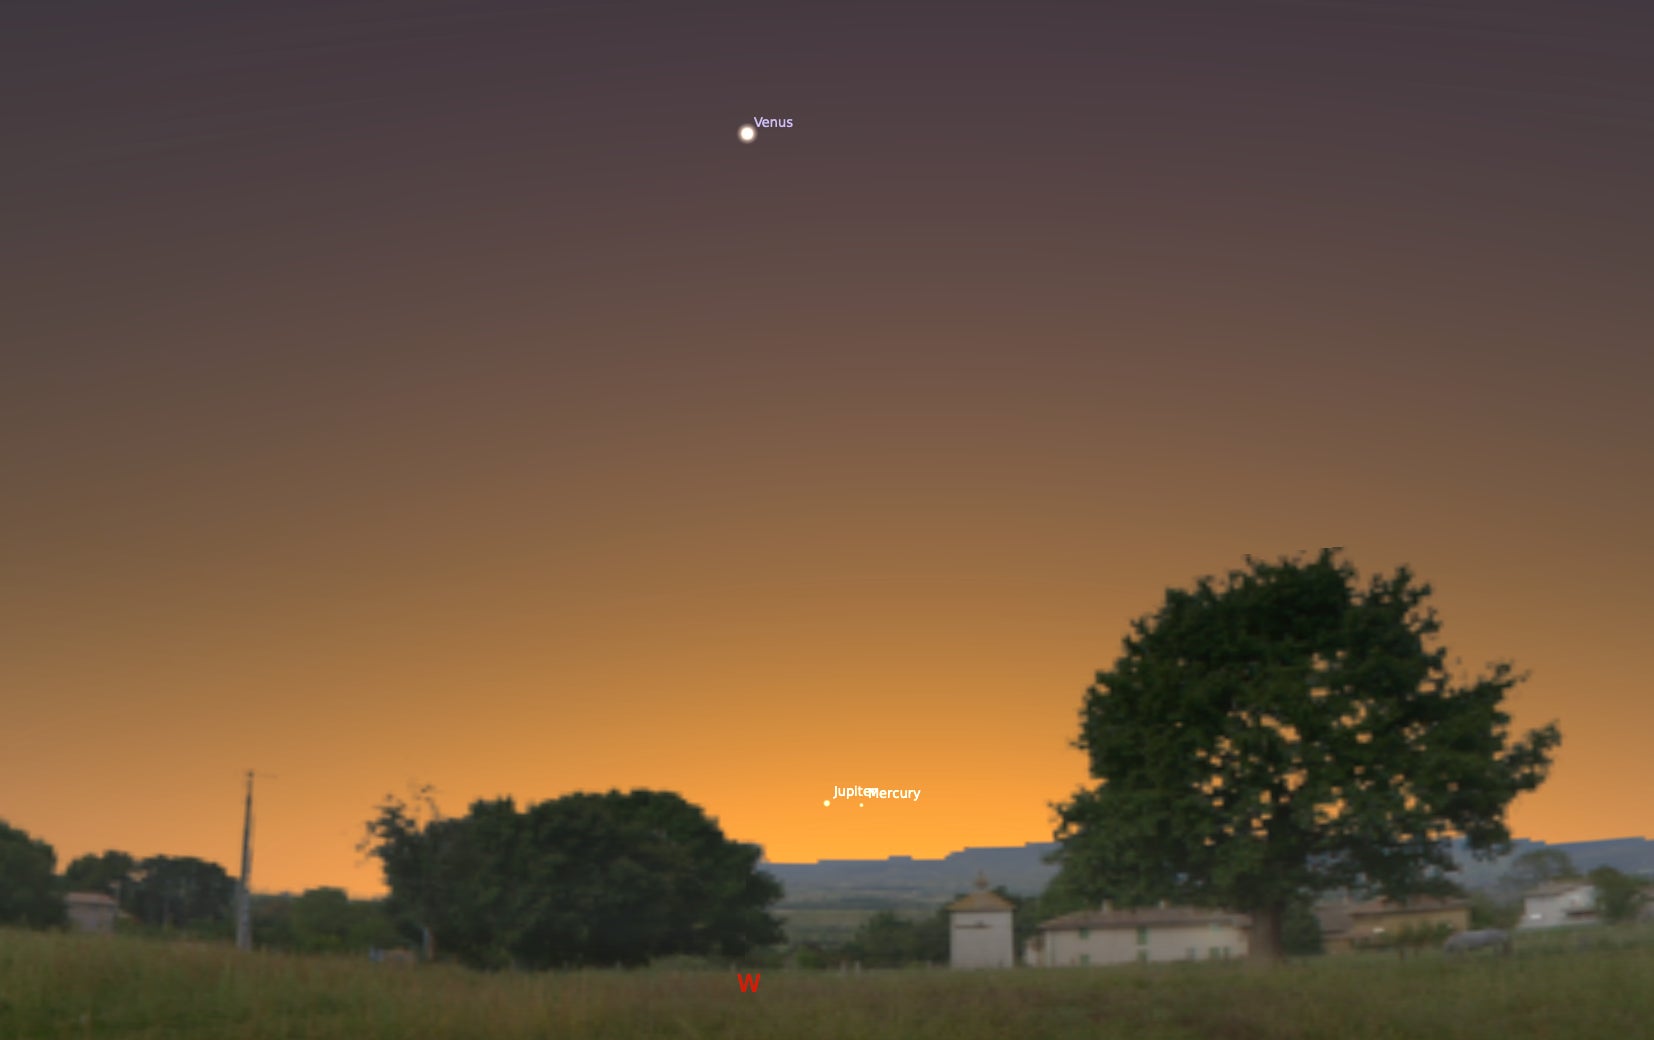 A sunset horizon, with Venus high up in the sky and Jupiter and Mercury low down, as they will appear in the planetary alignment on Tuesday, March 28, 2023.